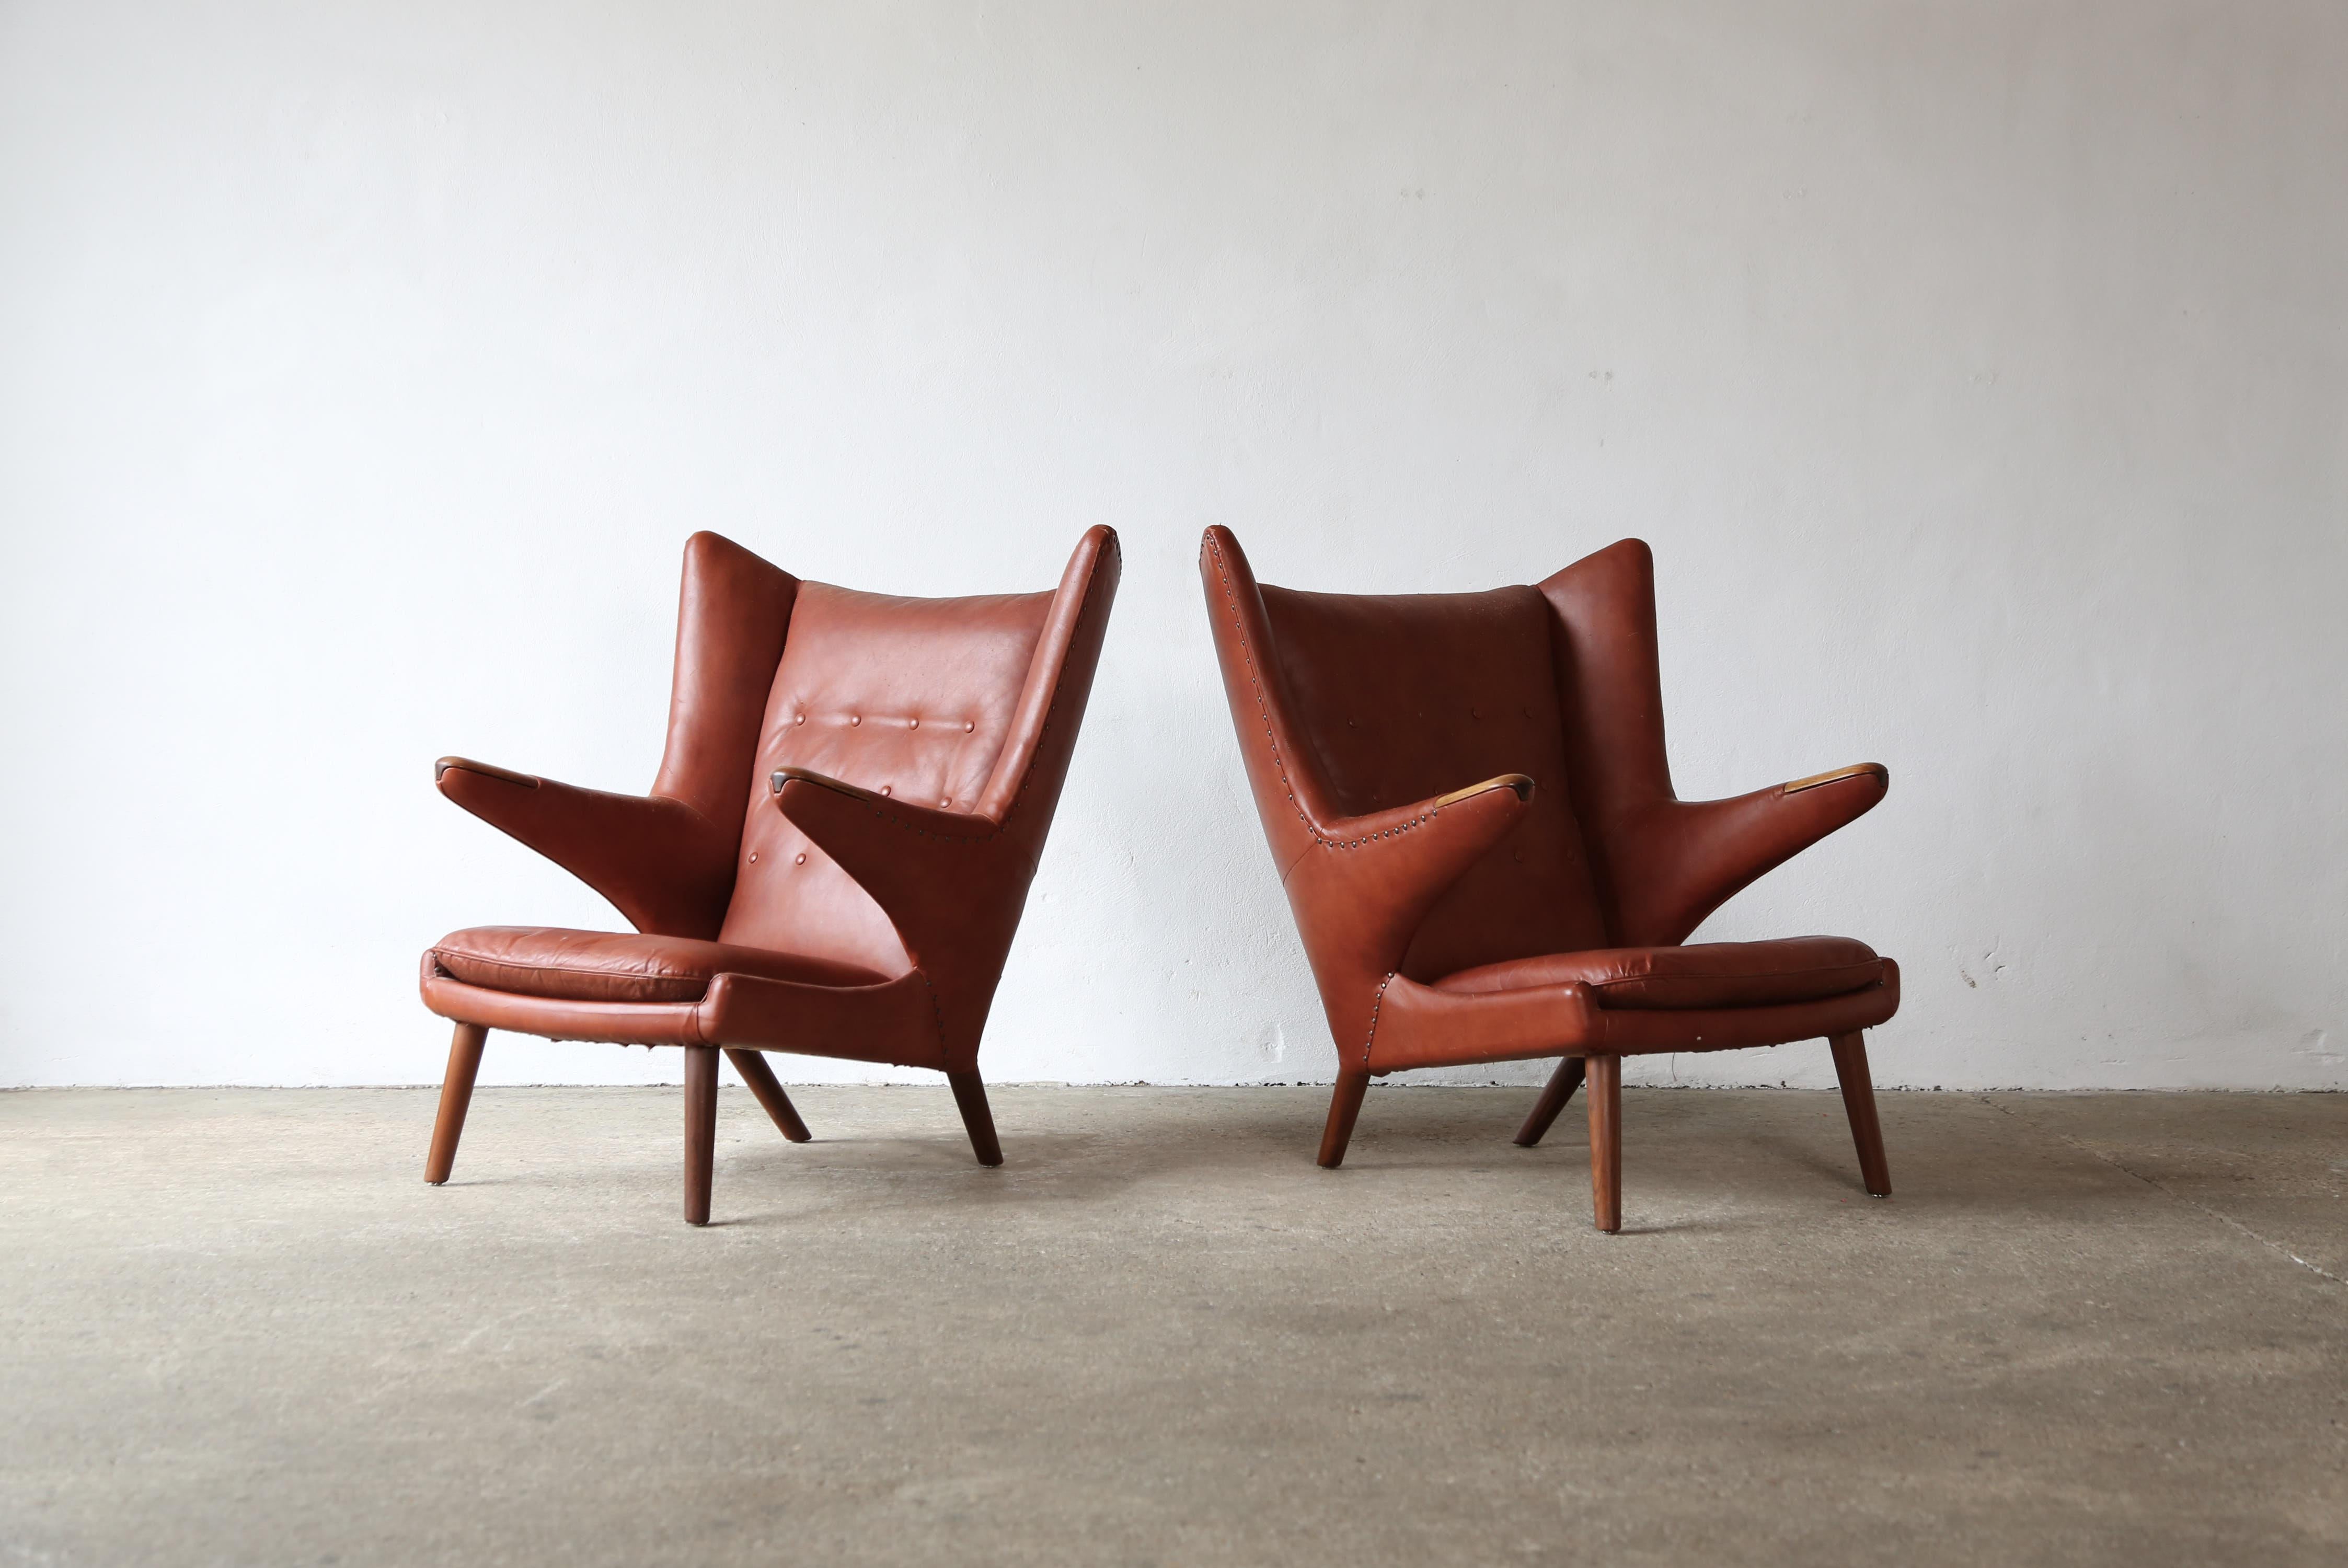 A rare original pair of Hans Wegner papa bear chairs designed in 1947 and produced by AP Stolen in Denmark in the 1950s. The fabric shows excess signs of wear so these are offered in their current original condition for the customer to upholster in